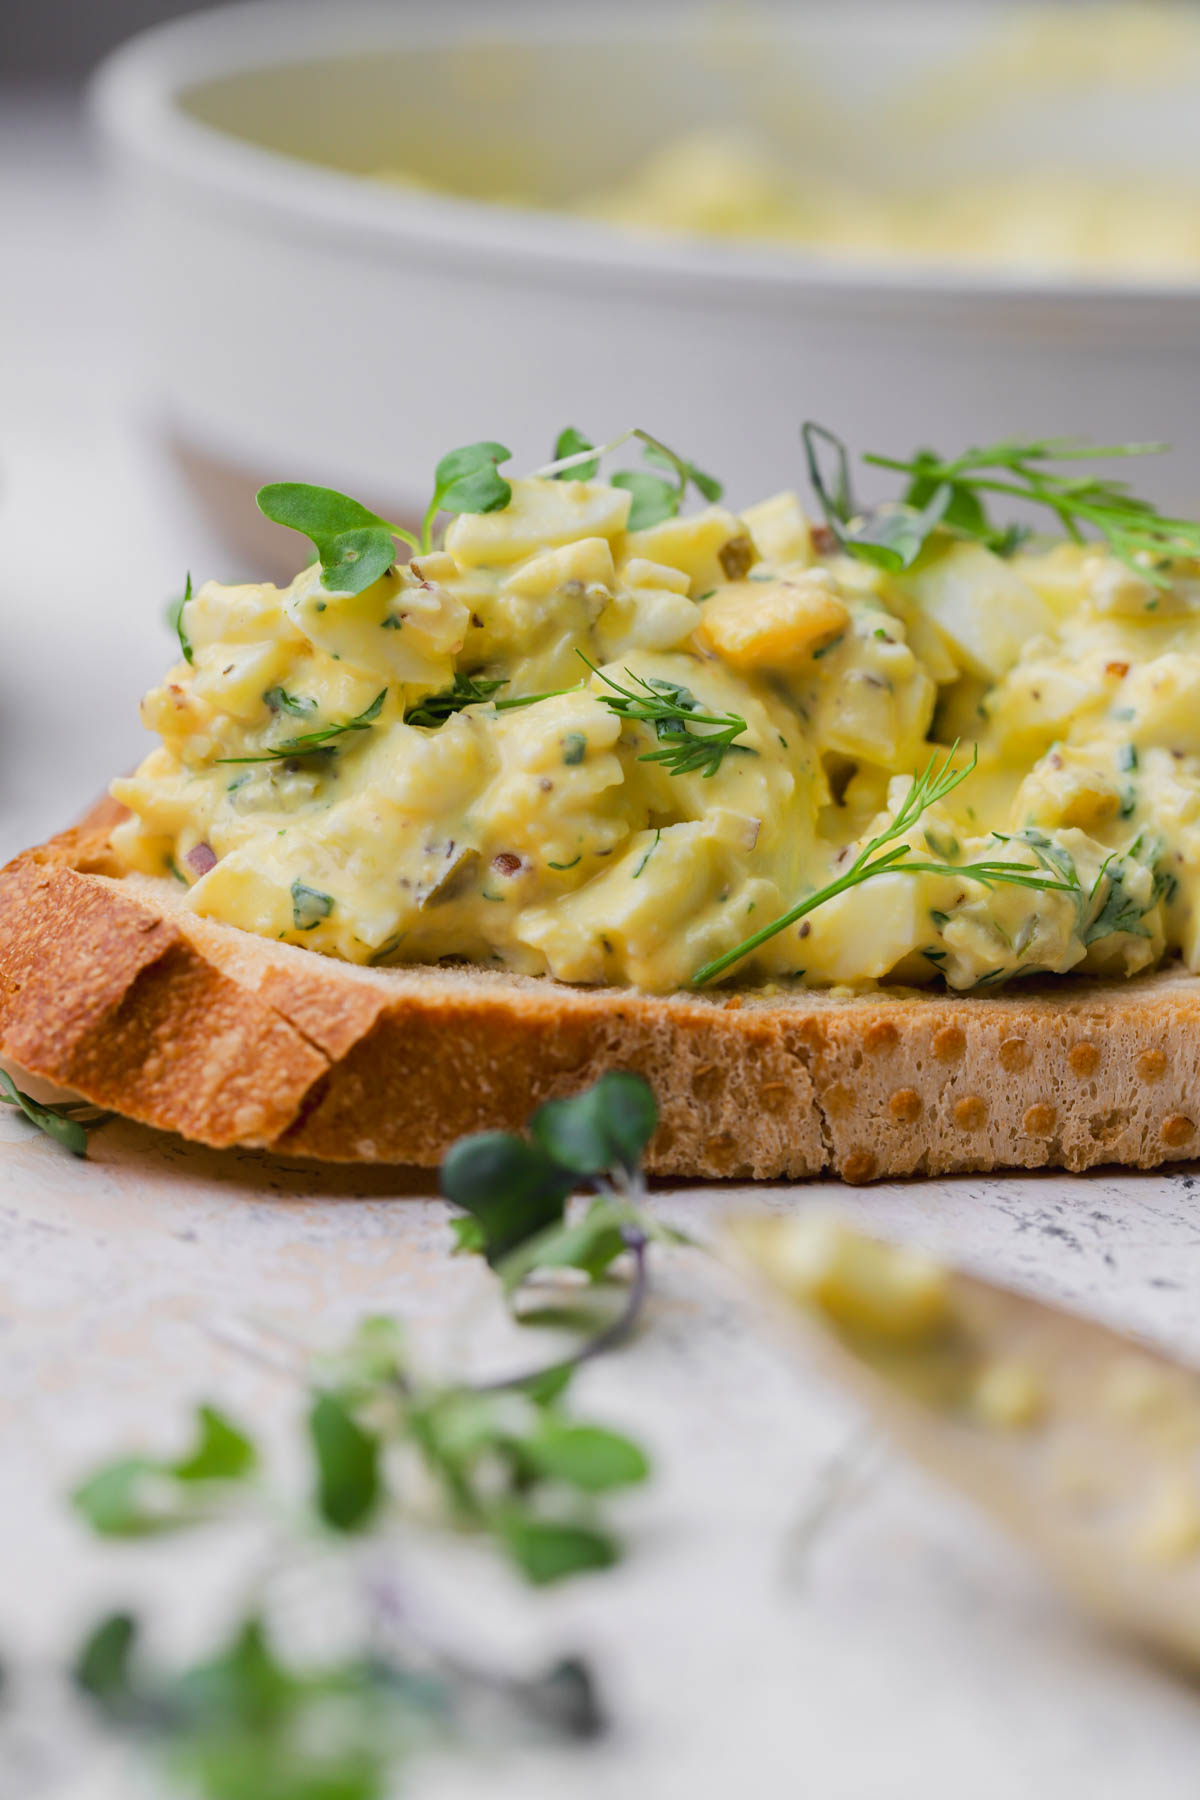 Egg salad with herbs, dill pickles, onion, mustard, and toasted bread. 